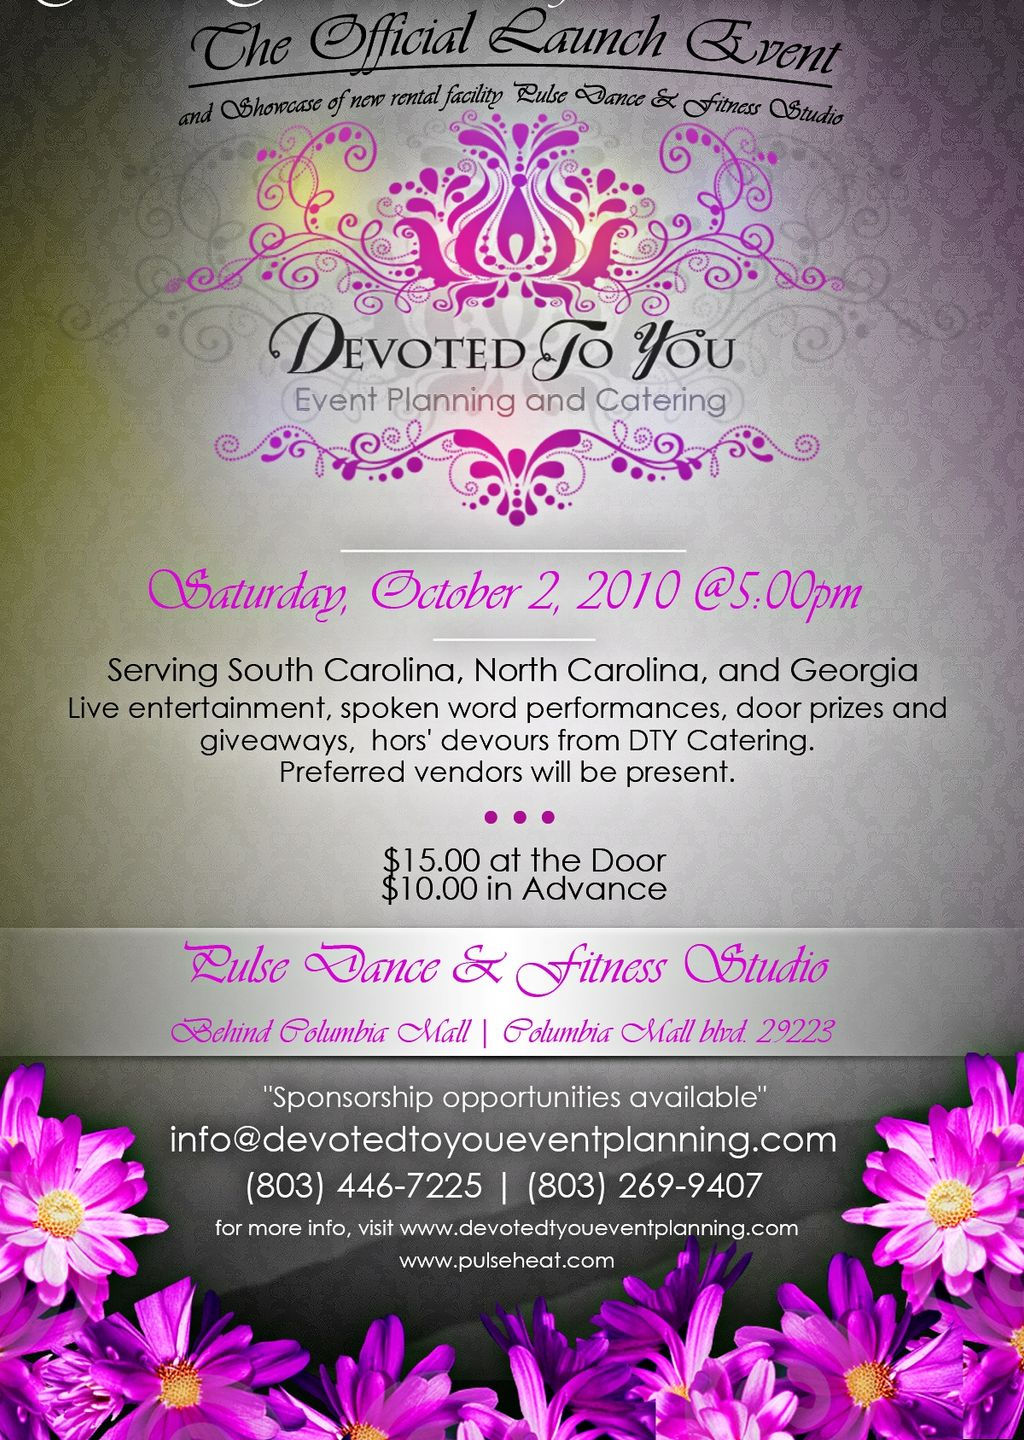 Devoted To You Event Planning & Catering